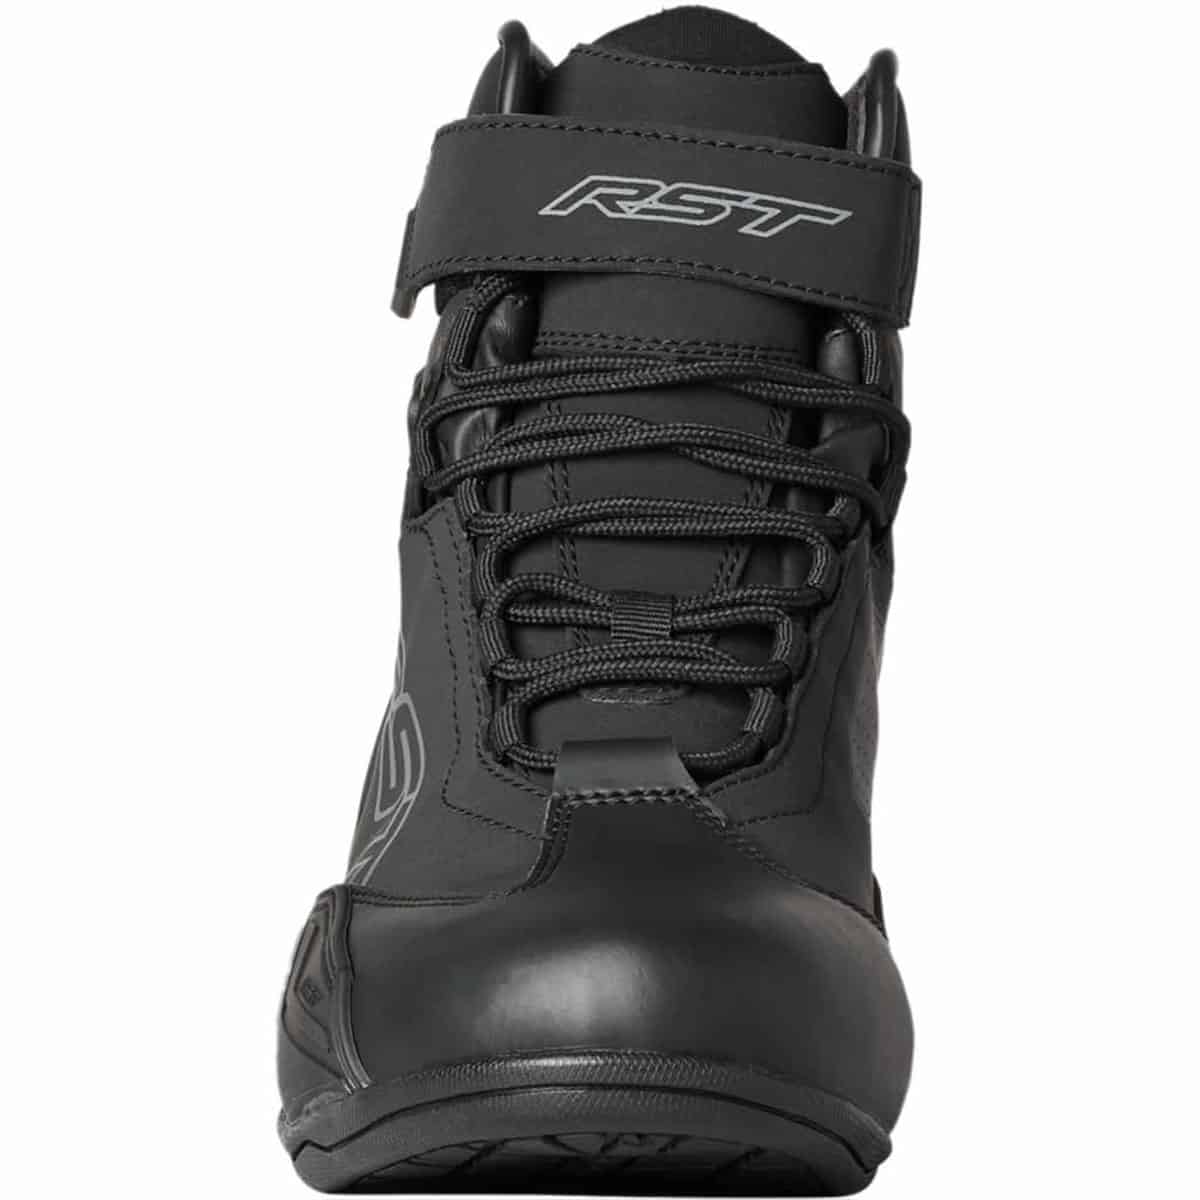 RST Sabre Moto Waterproof shoes front profile